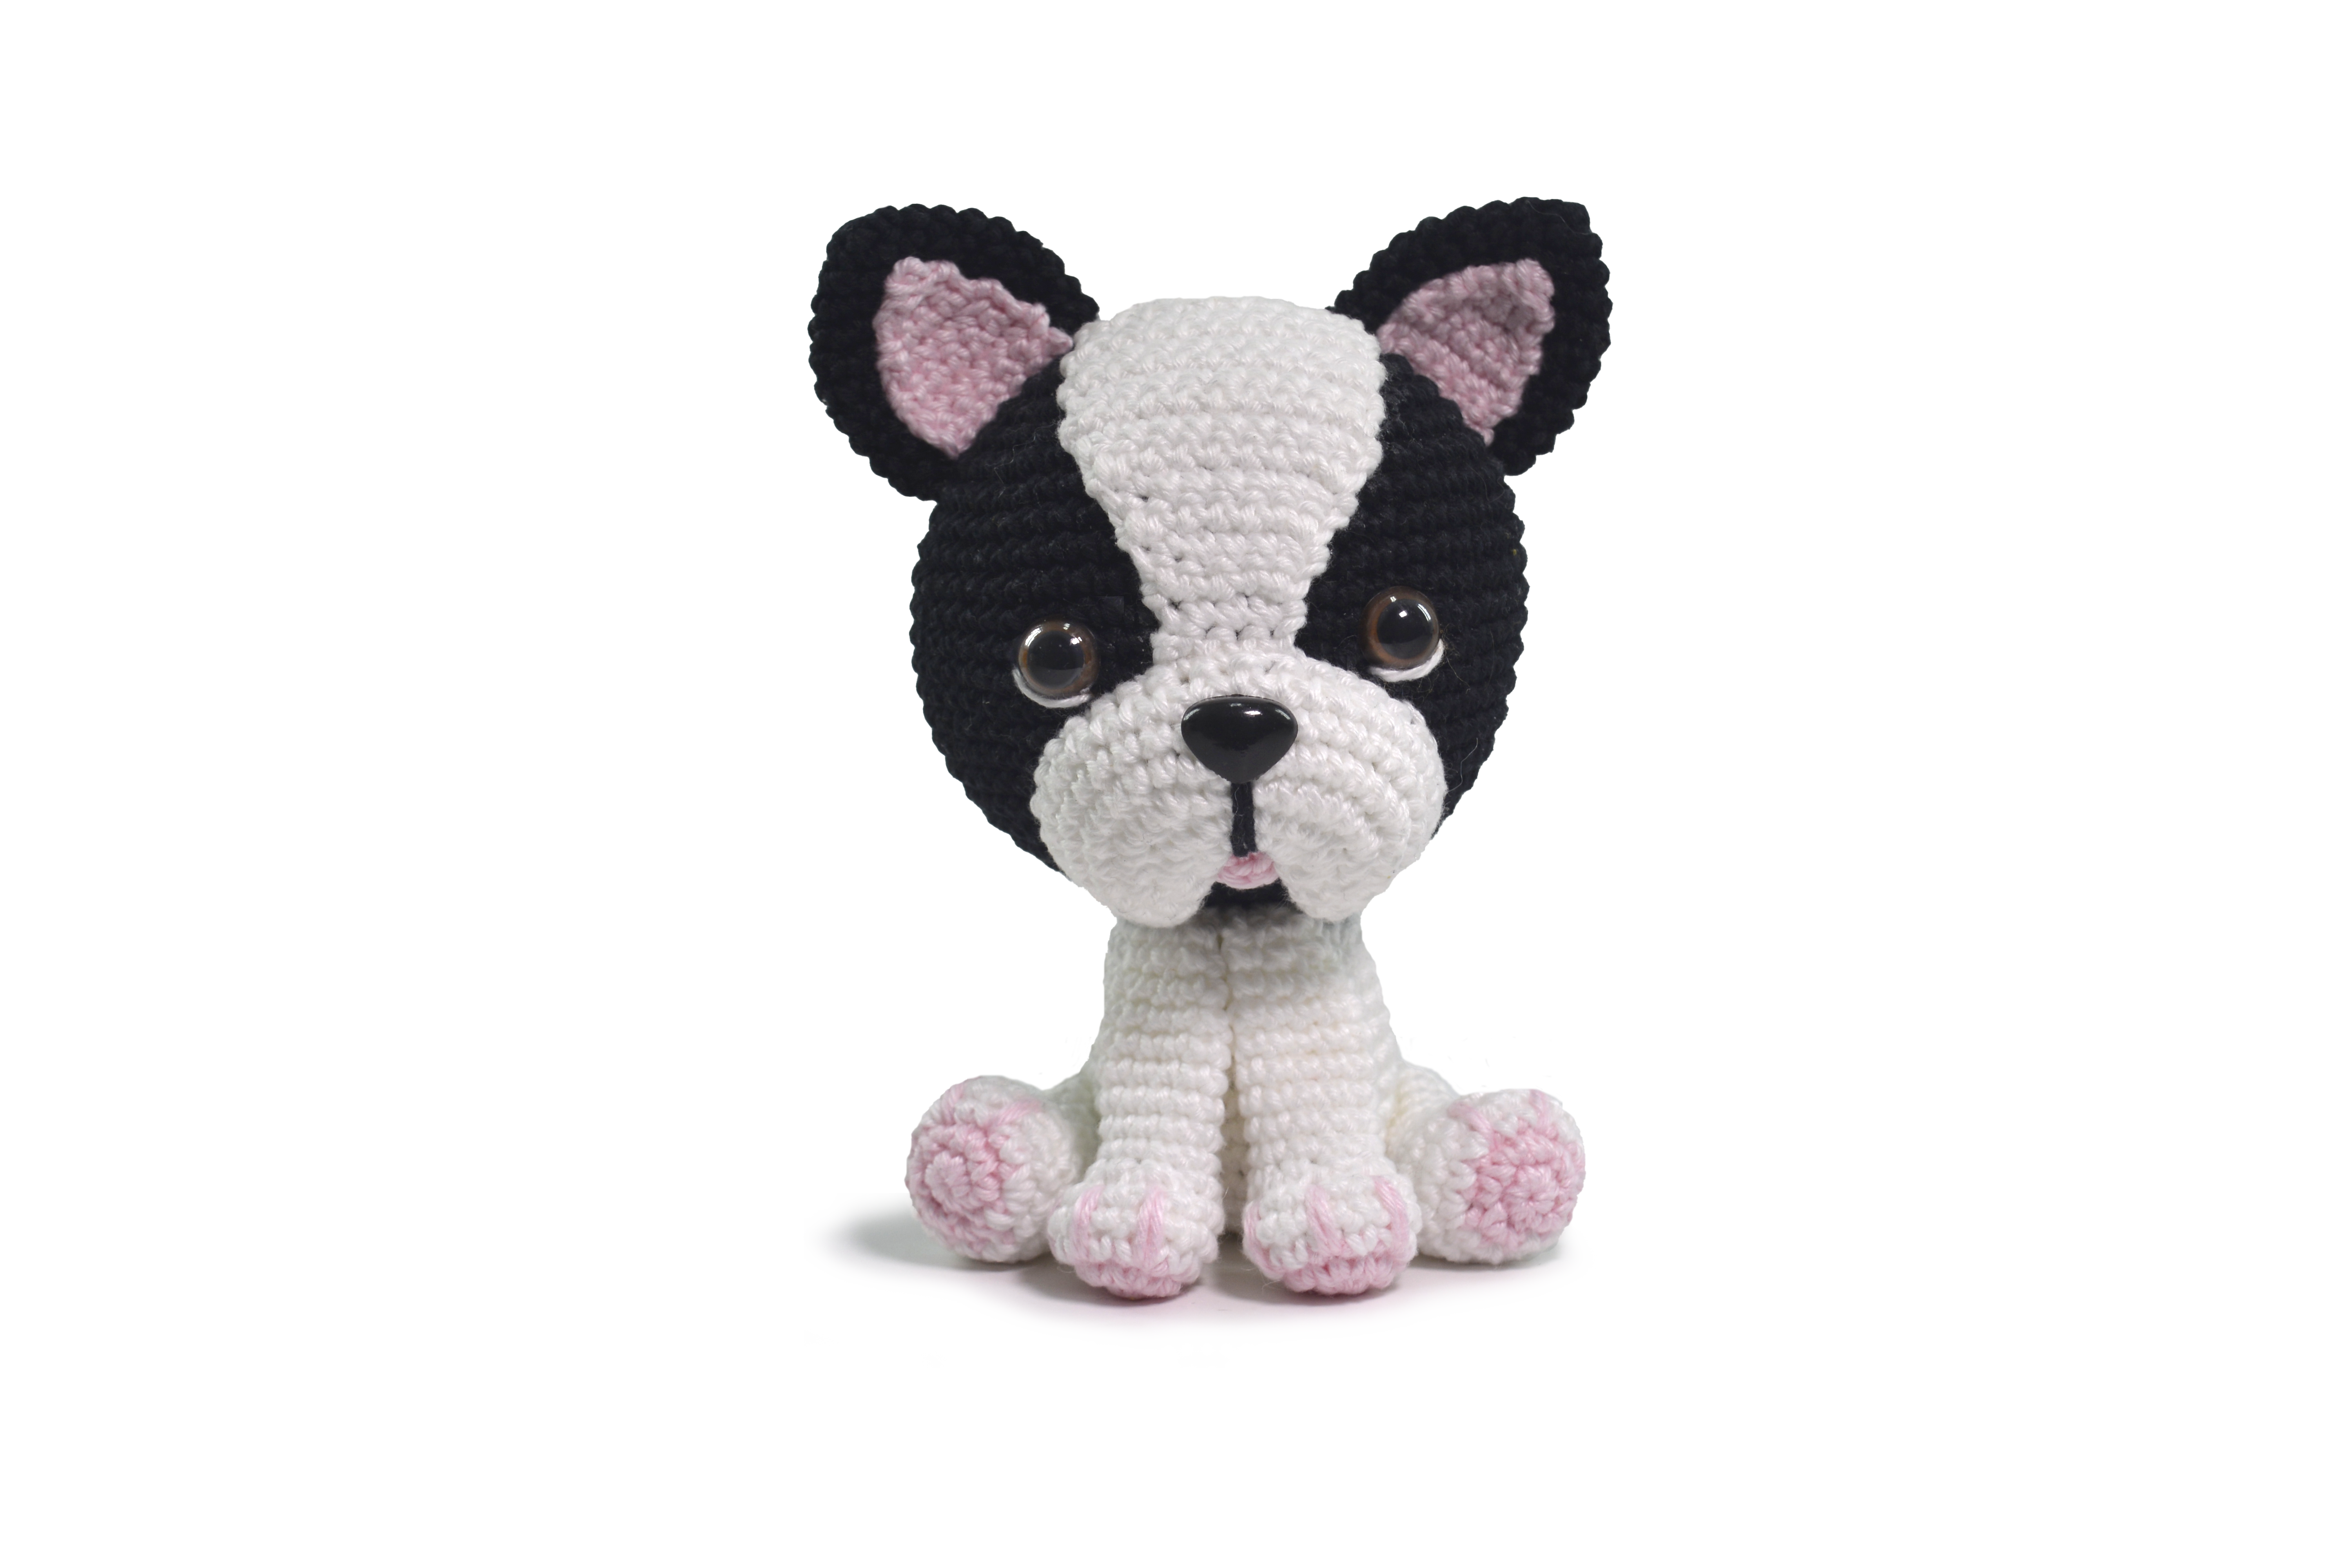 Circulo Amigurumi Kit - Cats & Dogs Collection - All Materials Included, Clear Easy to Follow Instructions - Intermediate Level - 1 Crochet Kit